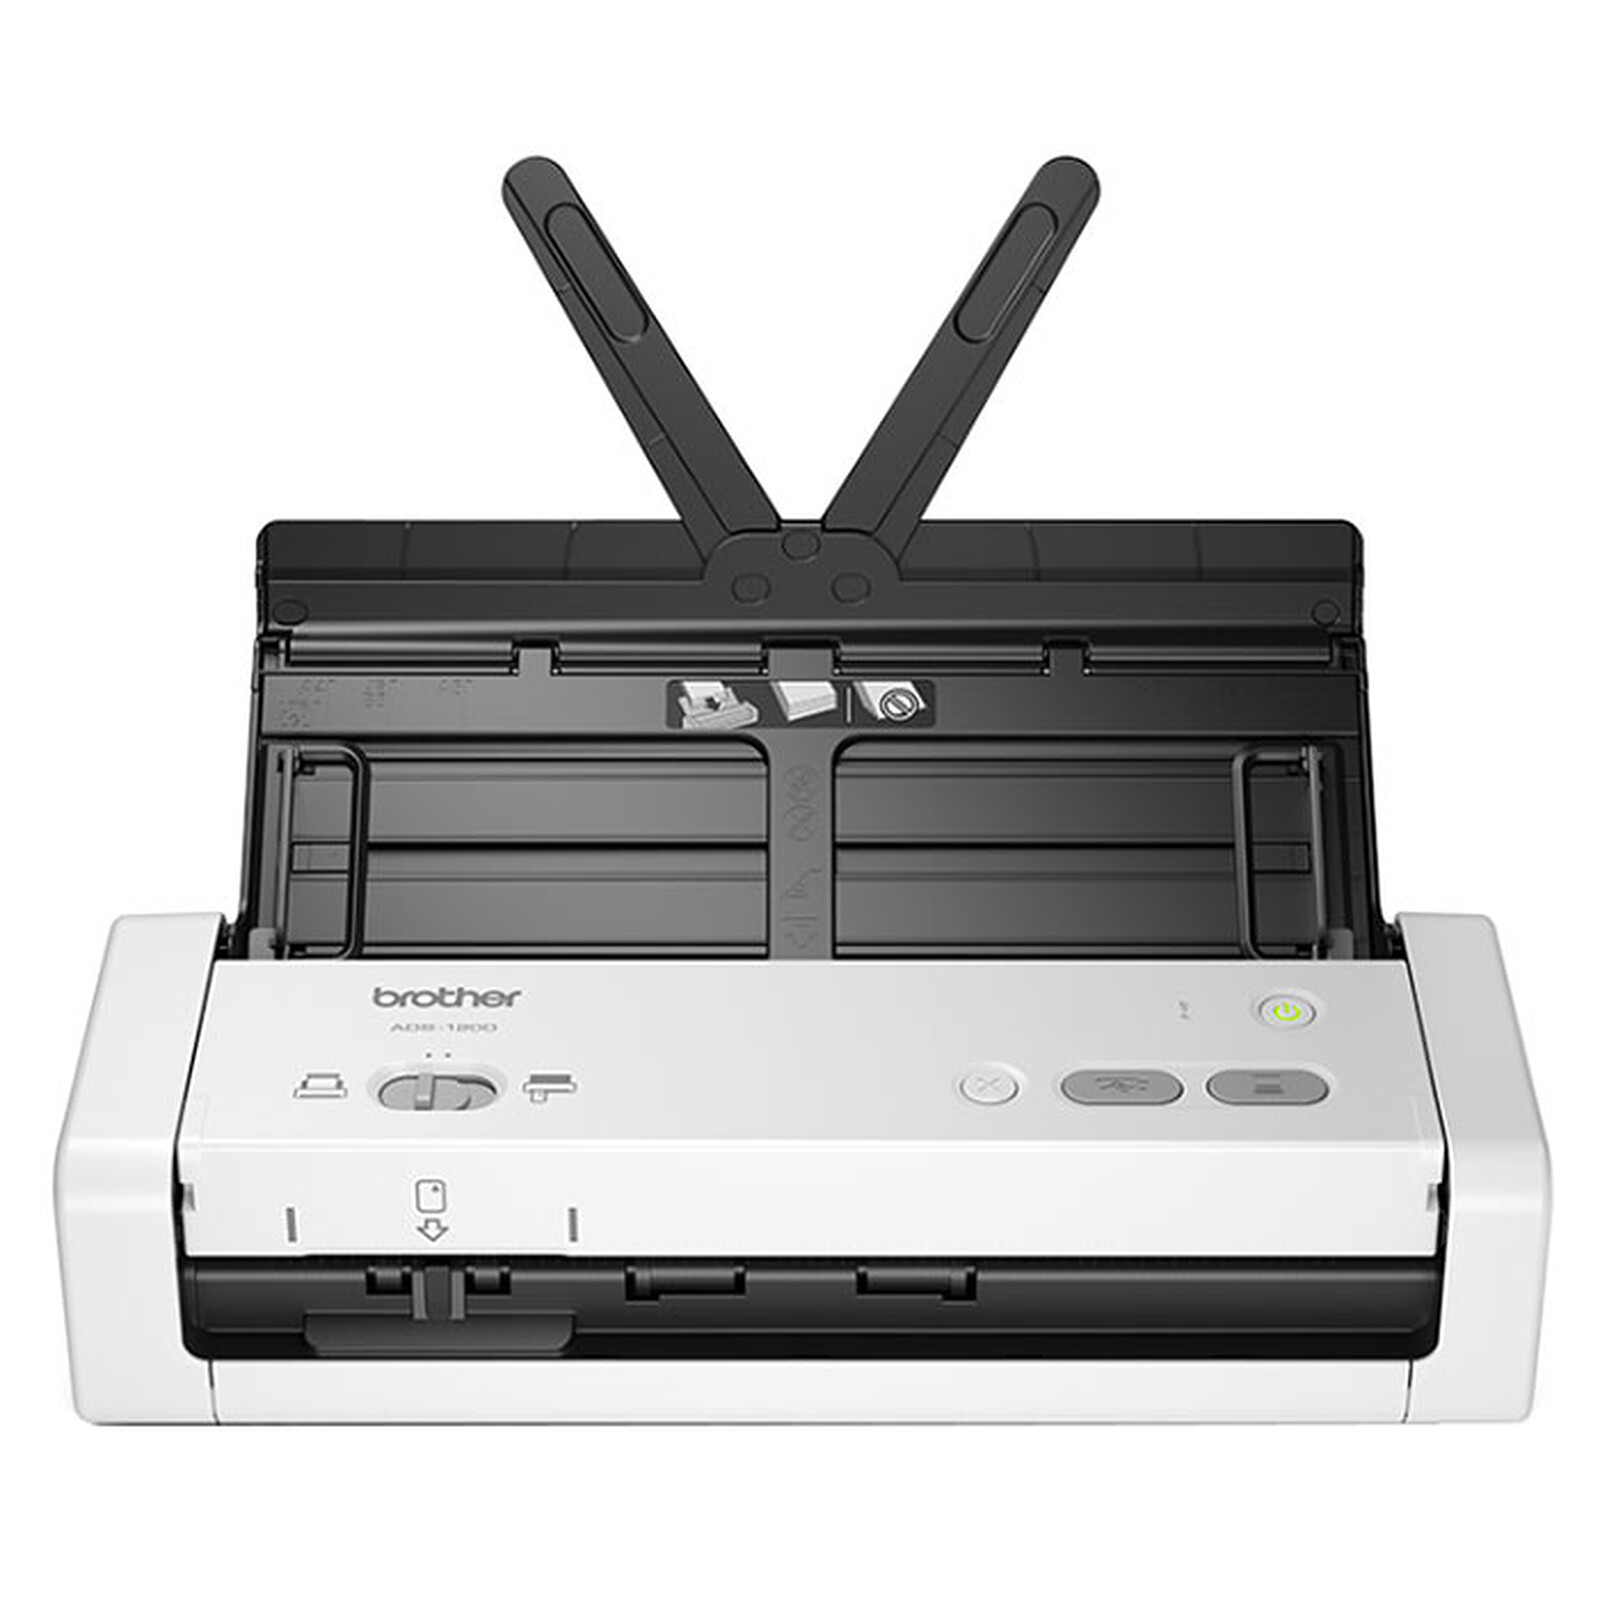 Brother ADS-1200 - Scanner - LDLC 3-year warranty